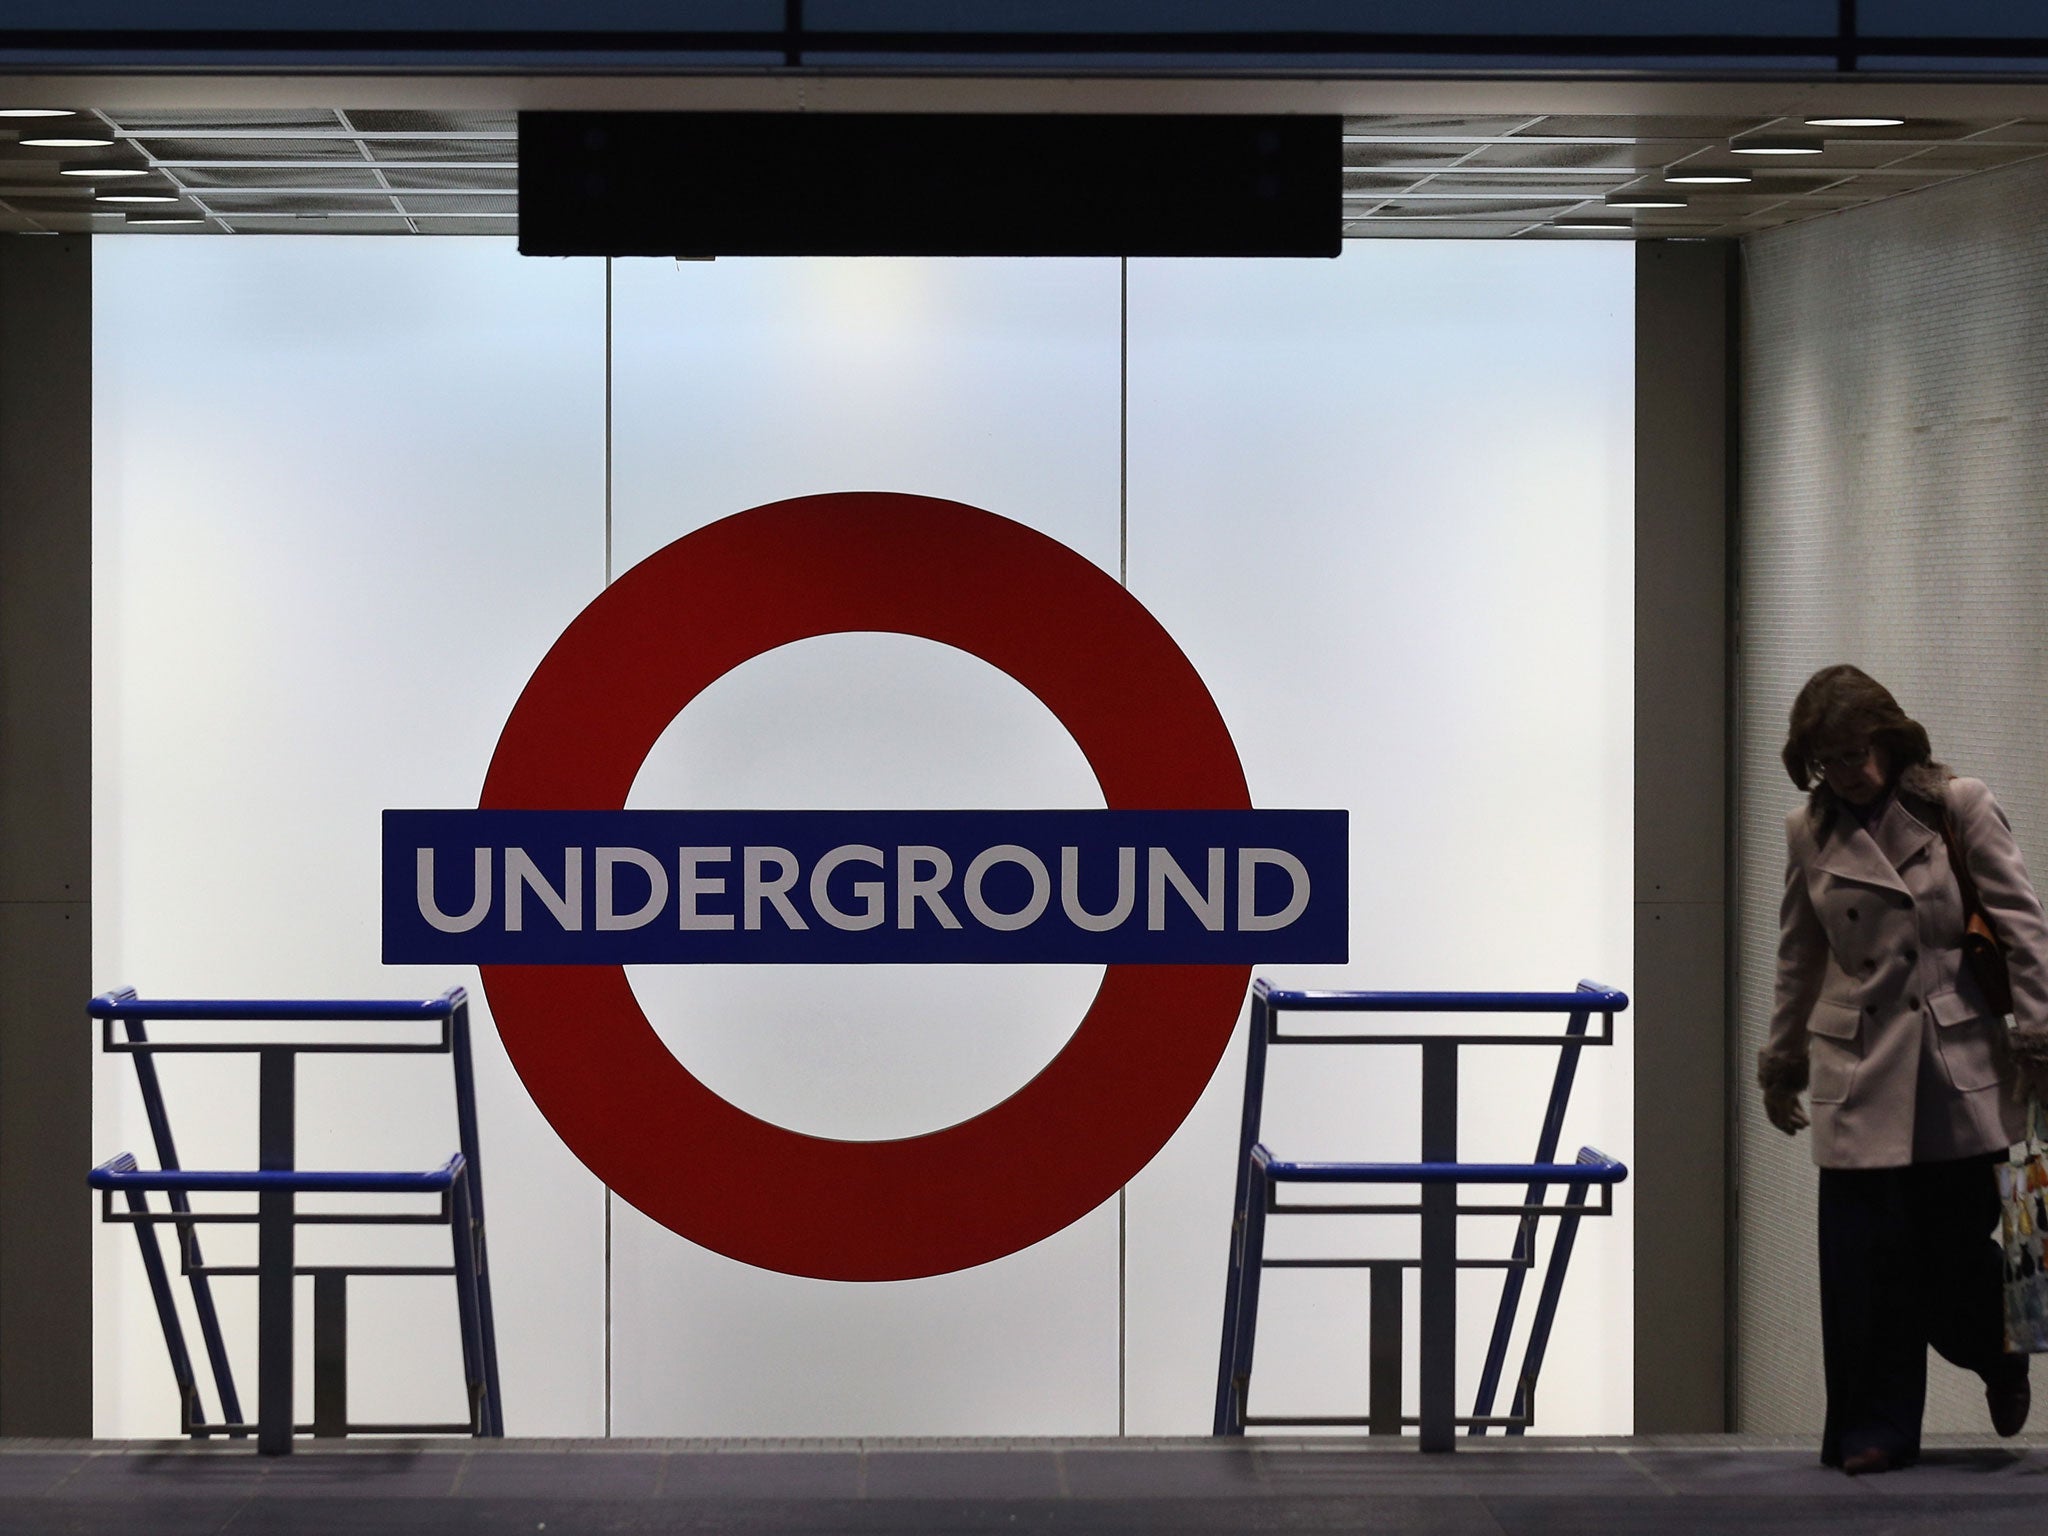 The London Underground is in talks with major supermarket retailers about opening a network of shops and 'click and collect' grocery services on the network